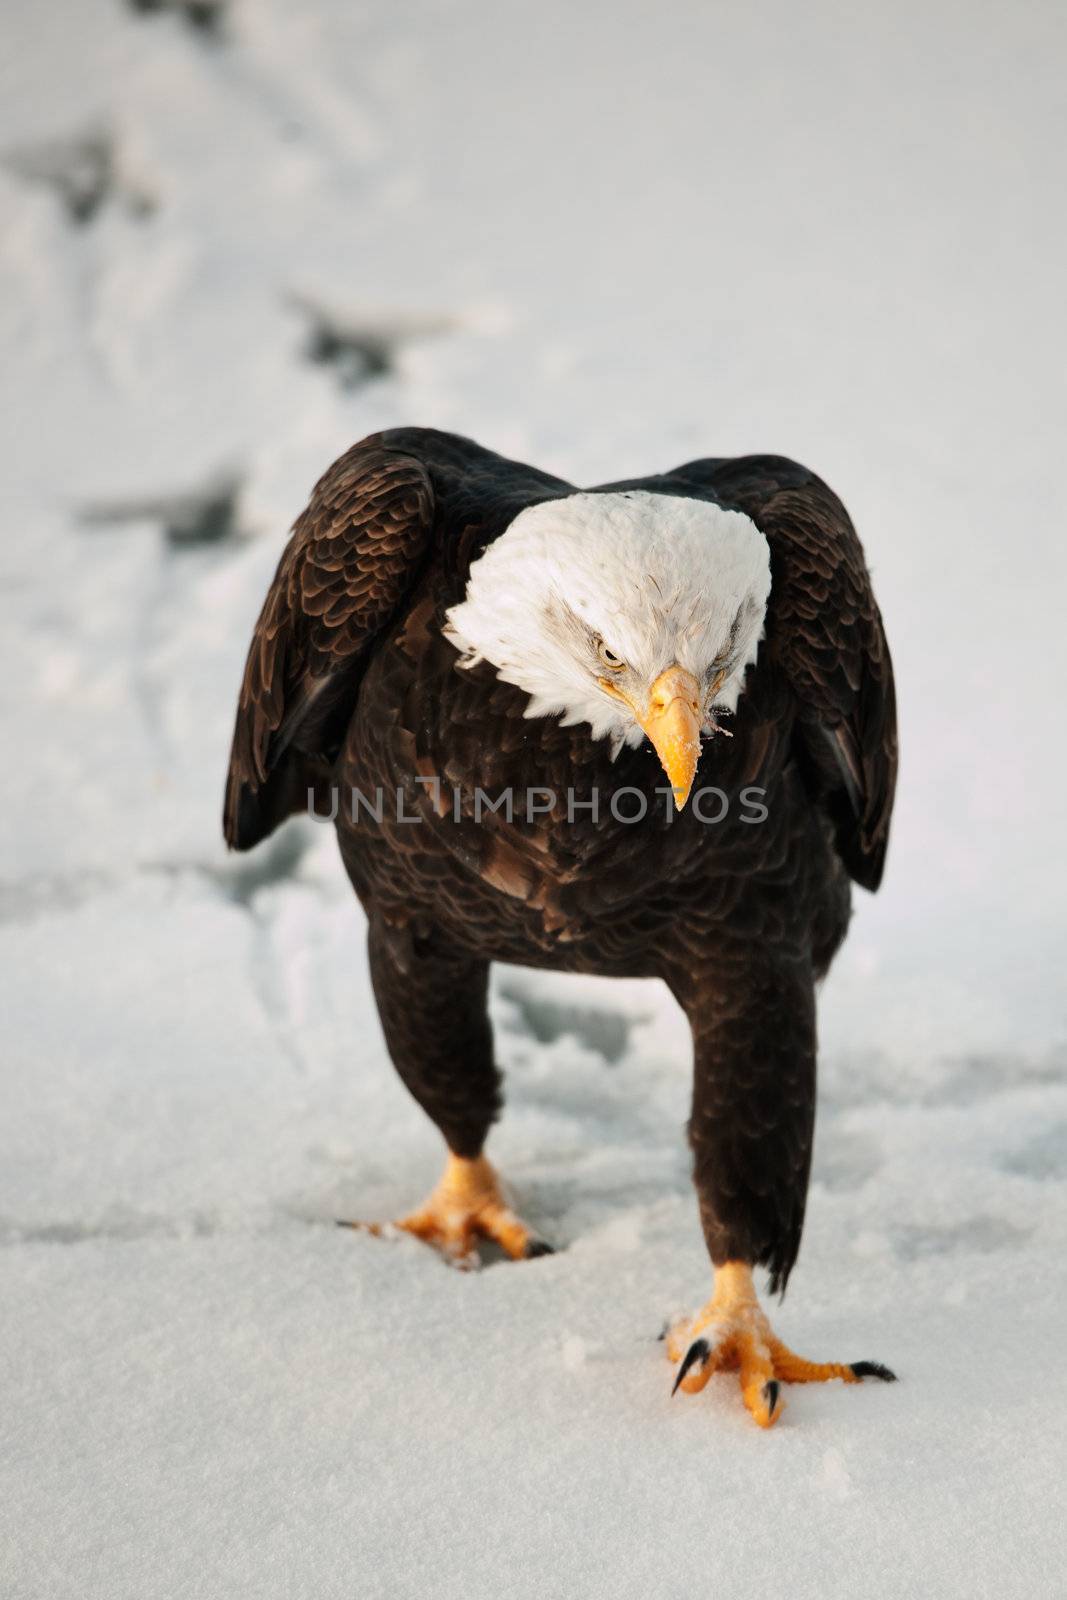 The bald eagle goes on snow, leaving traces.